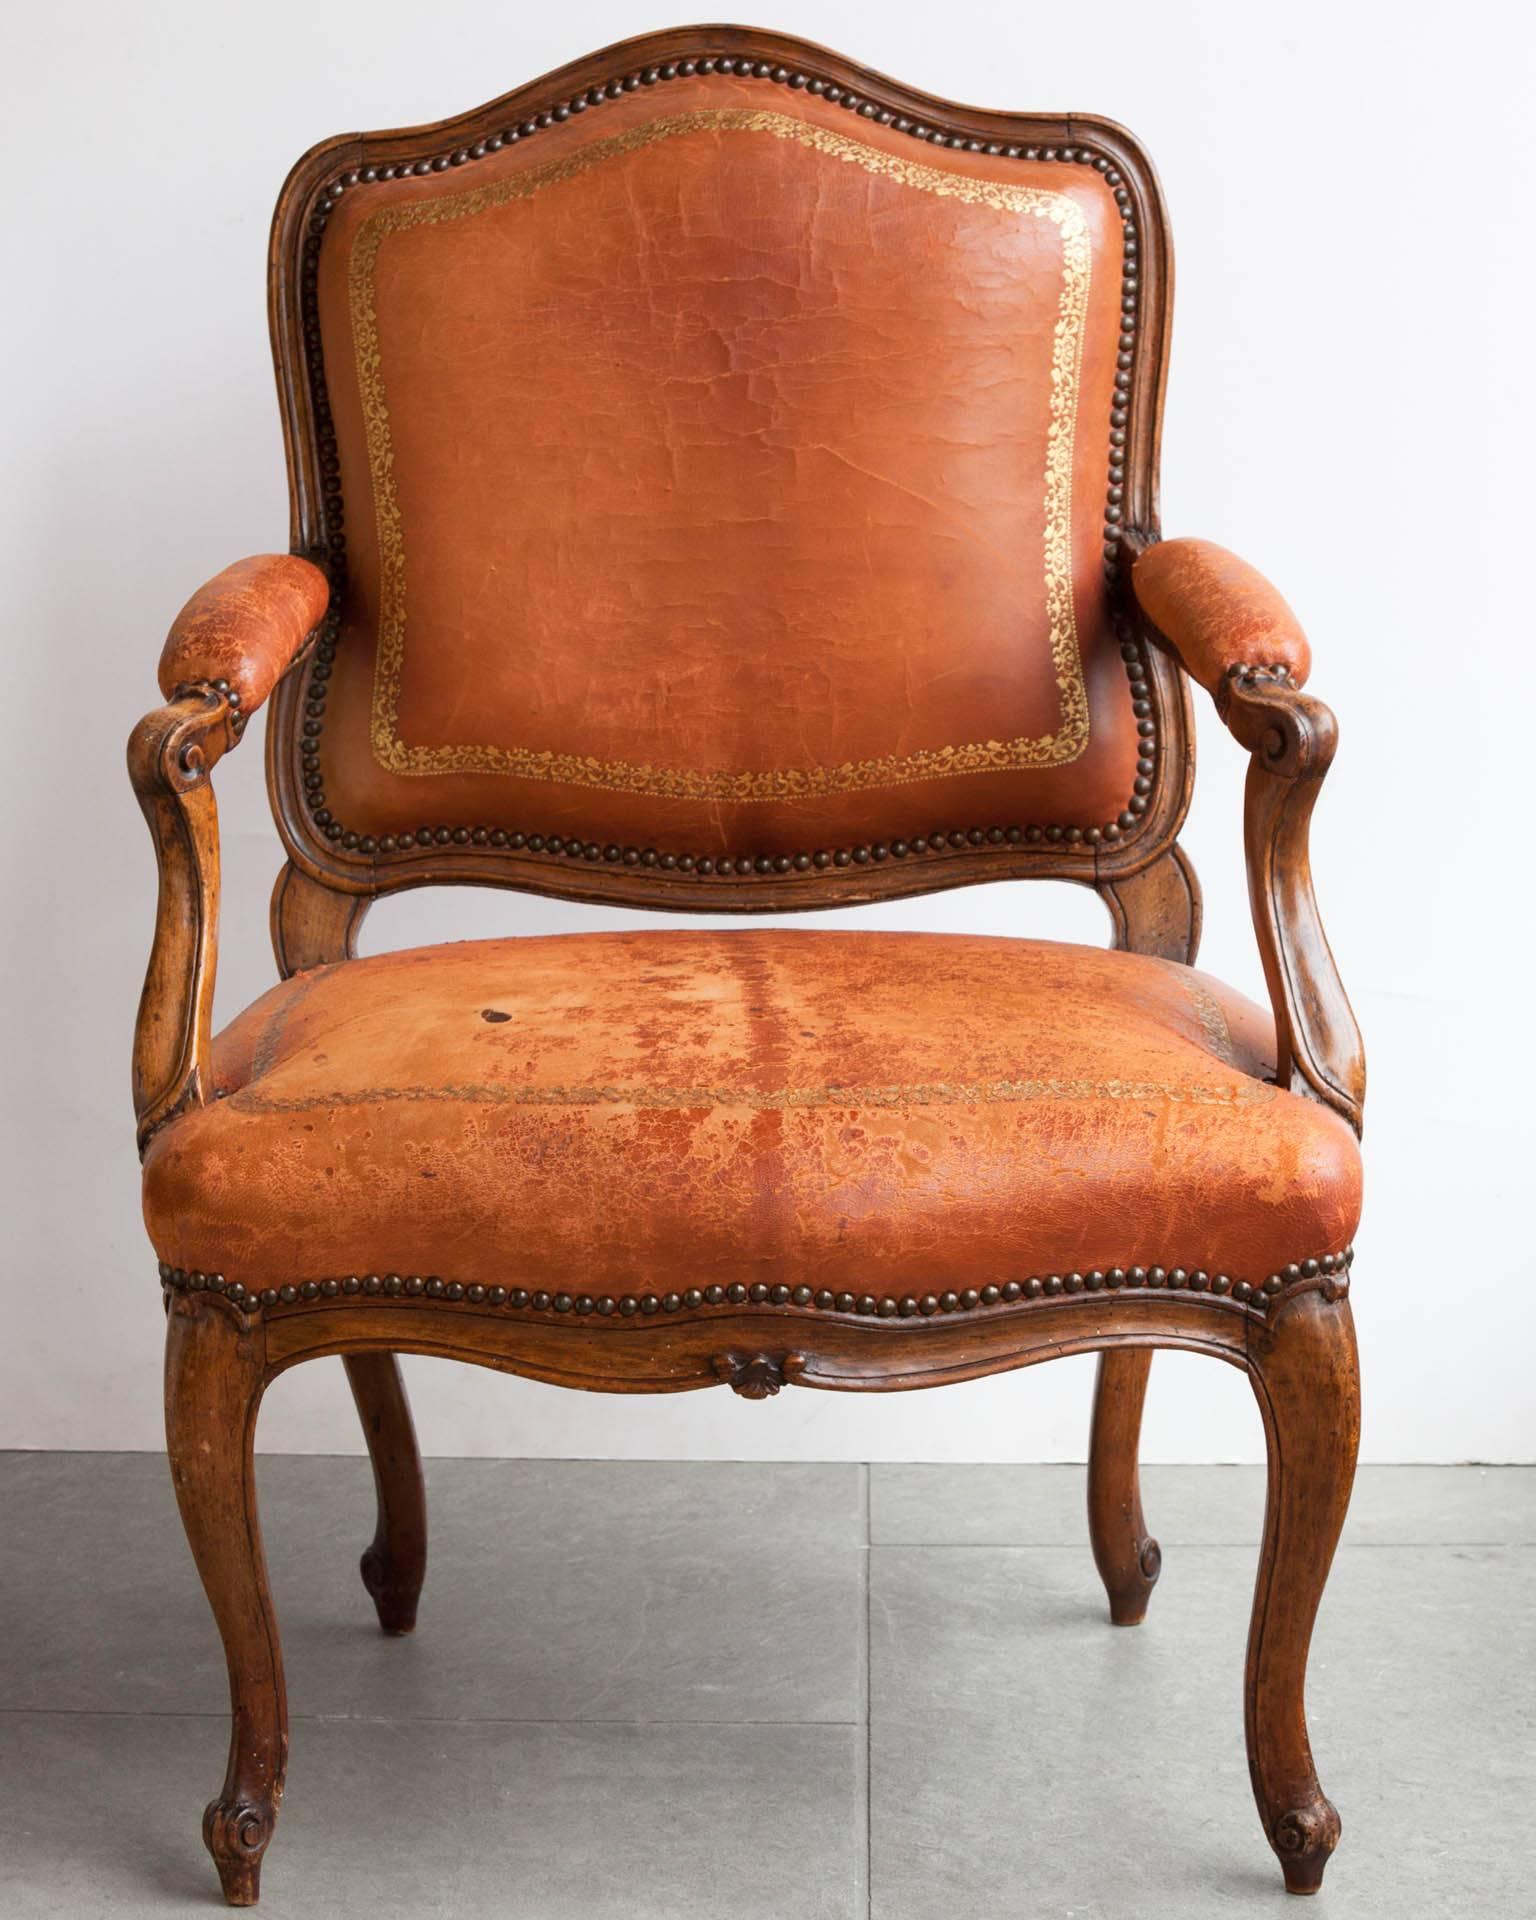 Mid-18th century carved beech armchair with curved legs terminating in carved scrolls. Upholstered in tan leather with gold tooling, in worn condition. 
Stamped by the maker 'G.Sene'.

We are members of LAPADA and CINOA.